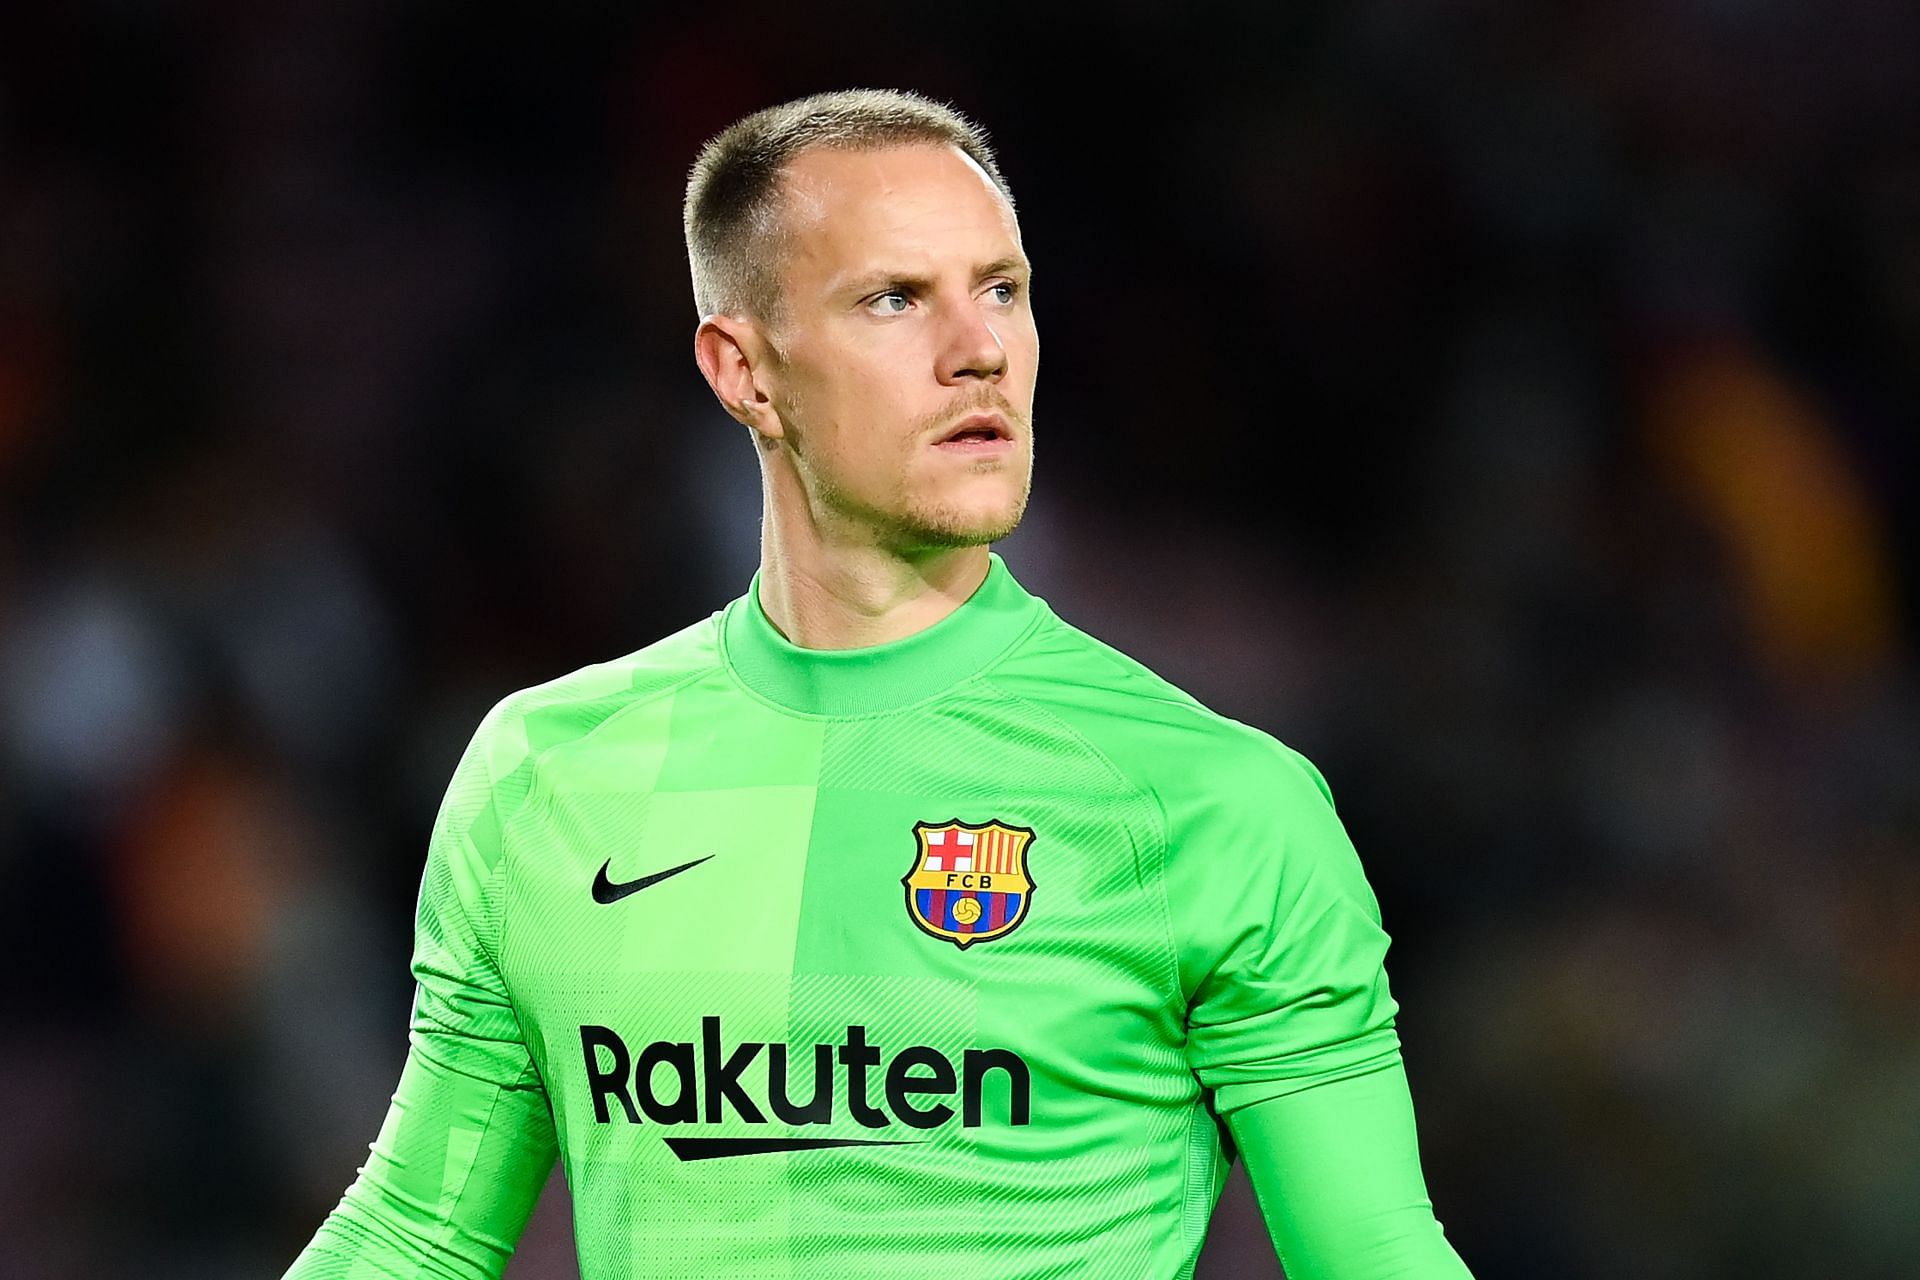 Marc-Andre ter Stegen is among the most talented goalkeepers of his generation.